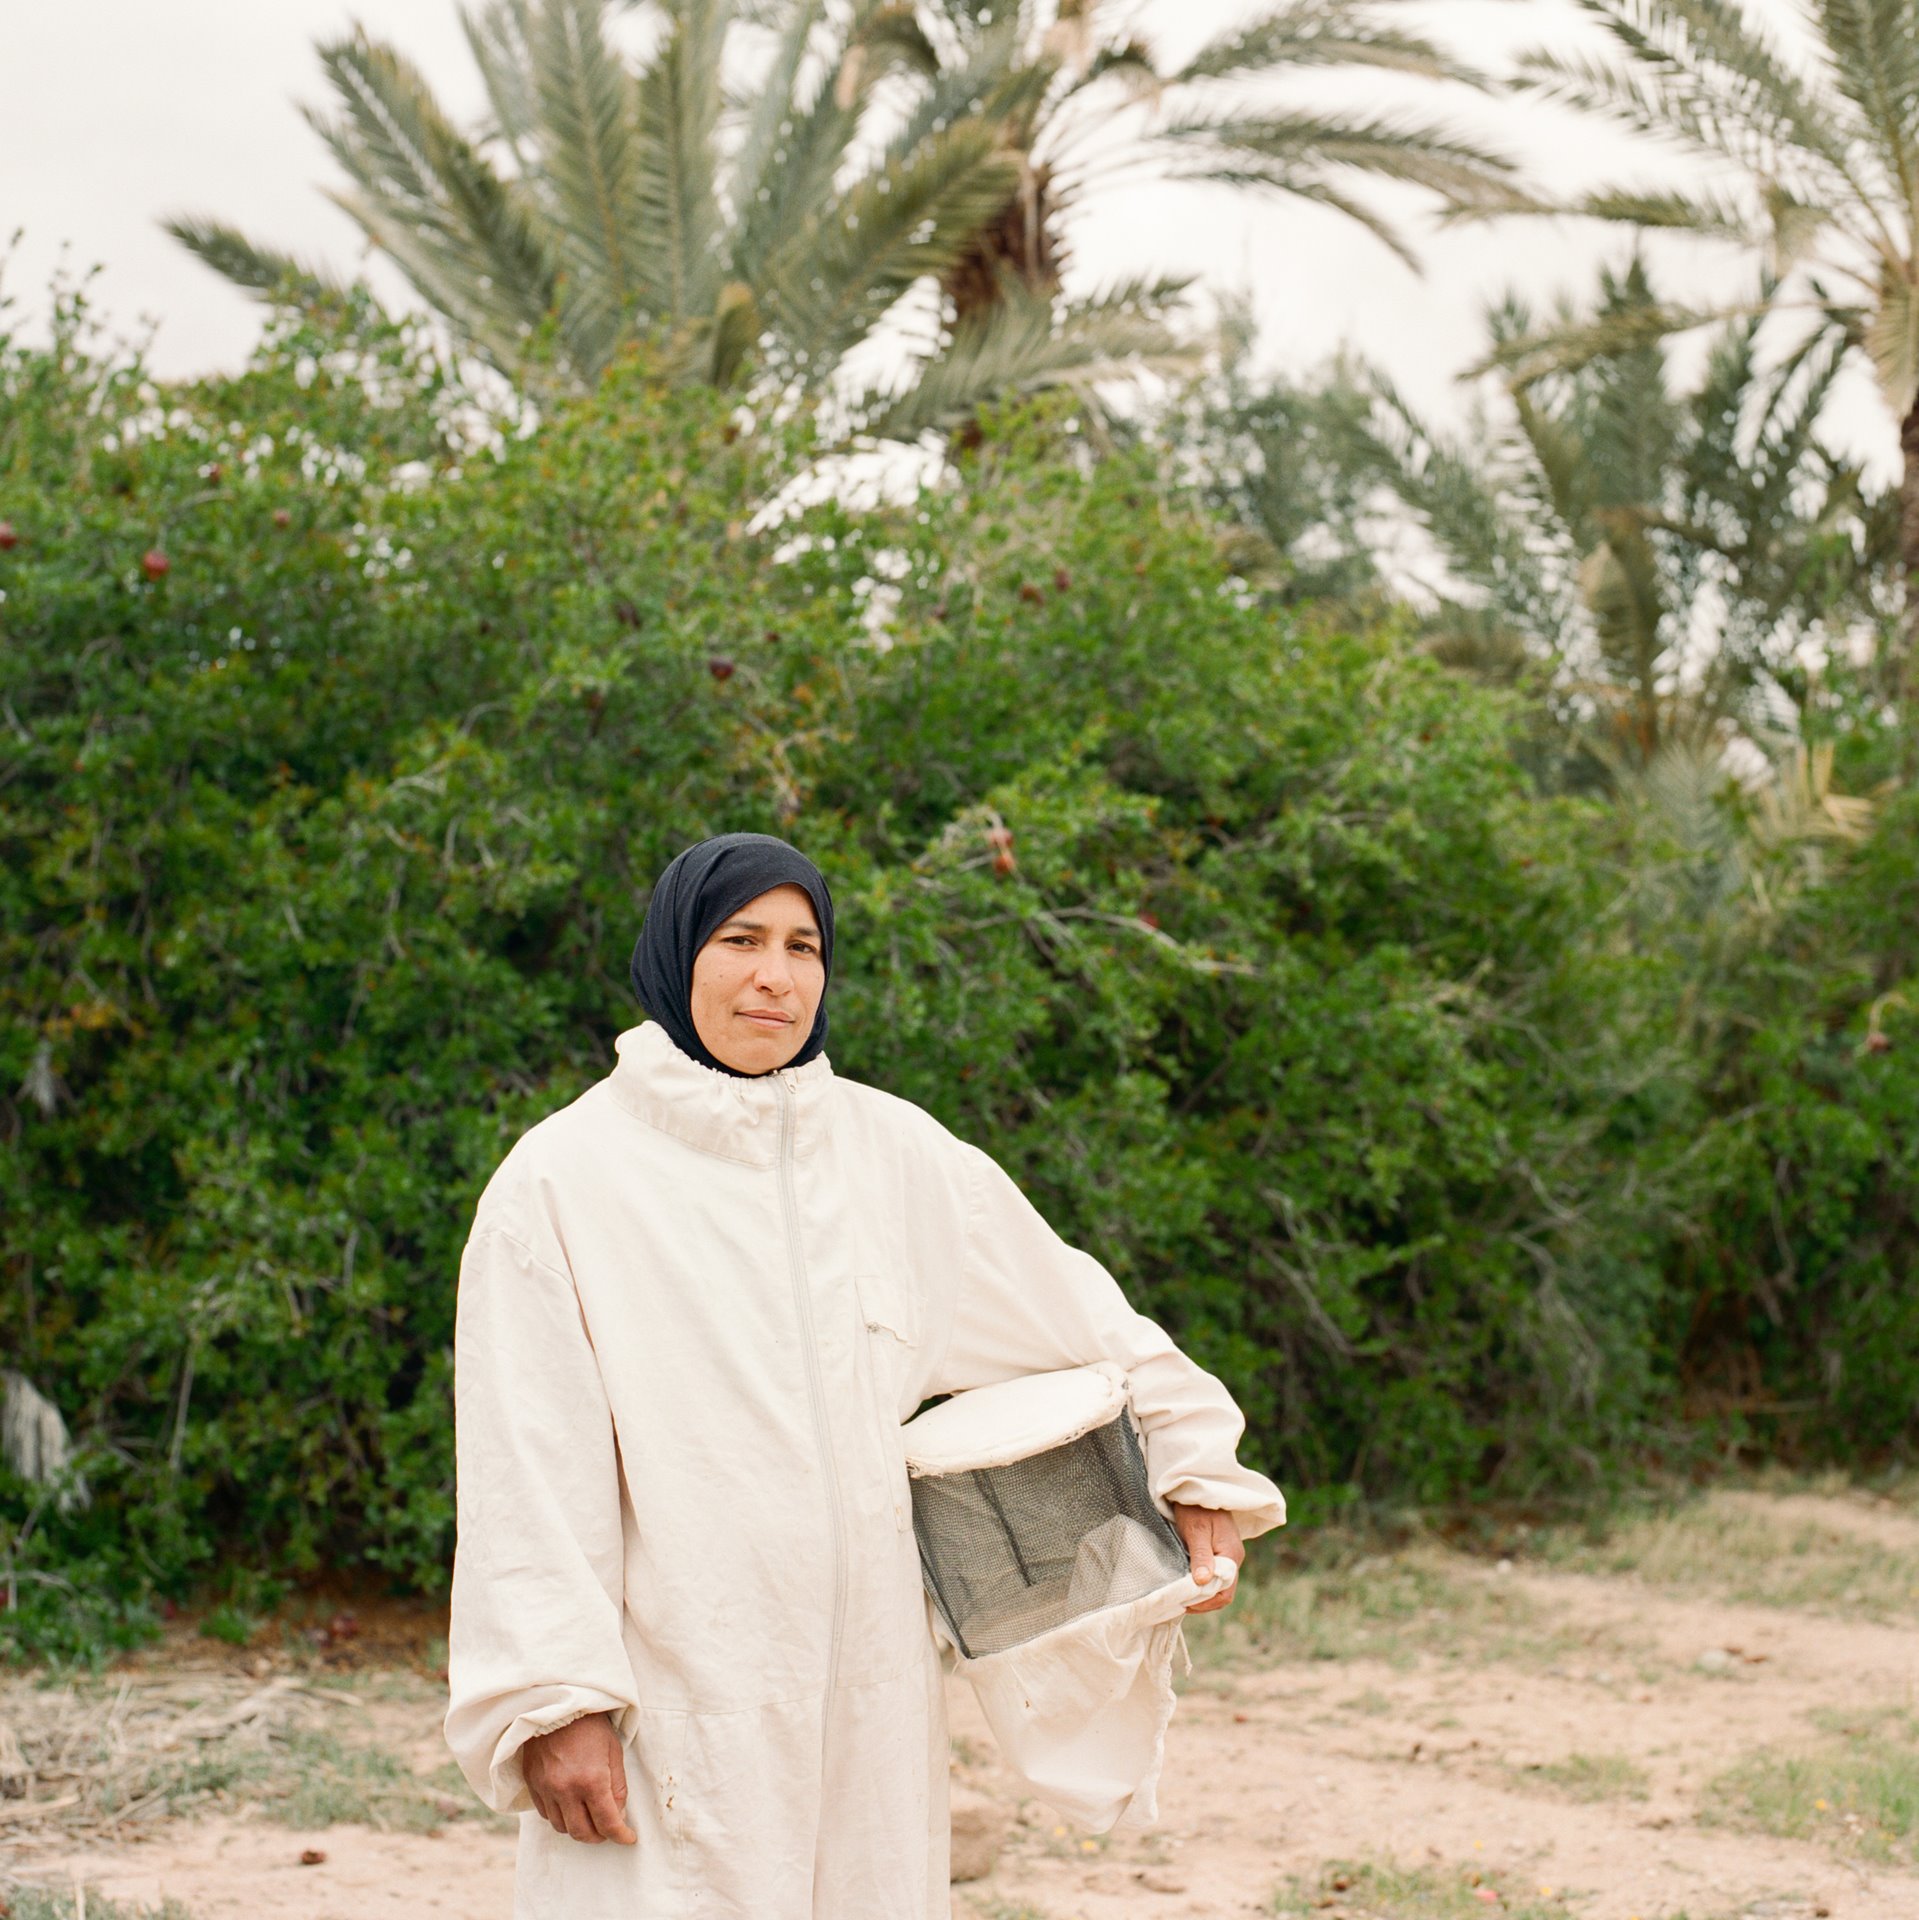 Zakia El Yamani (34) stands in her protective beekeeper&rsquo;s outfit, at Skoura Oasis, in central Morocco. She works to save the yellow Saharan bee. This millennia-old species is endemic to the oases of southern Morocco, but its population has dramatically declined following the use of pesticides against locusts in the 1980s, and the introduction of more aggressive Tellian black bees to the area.